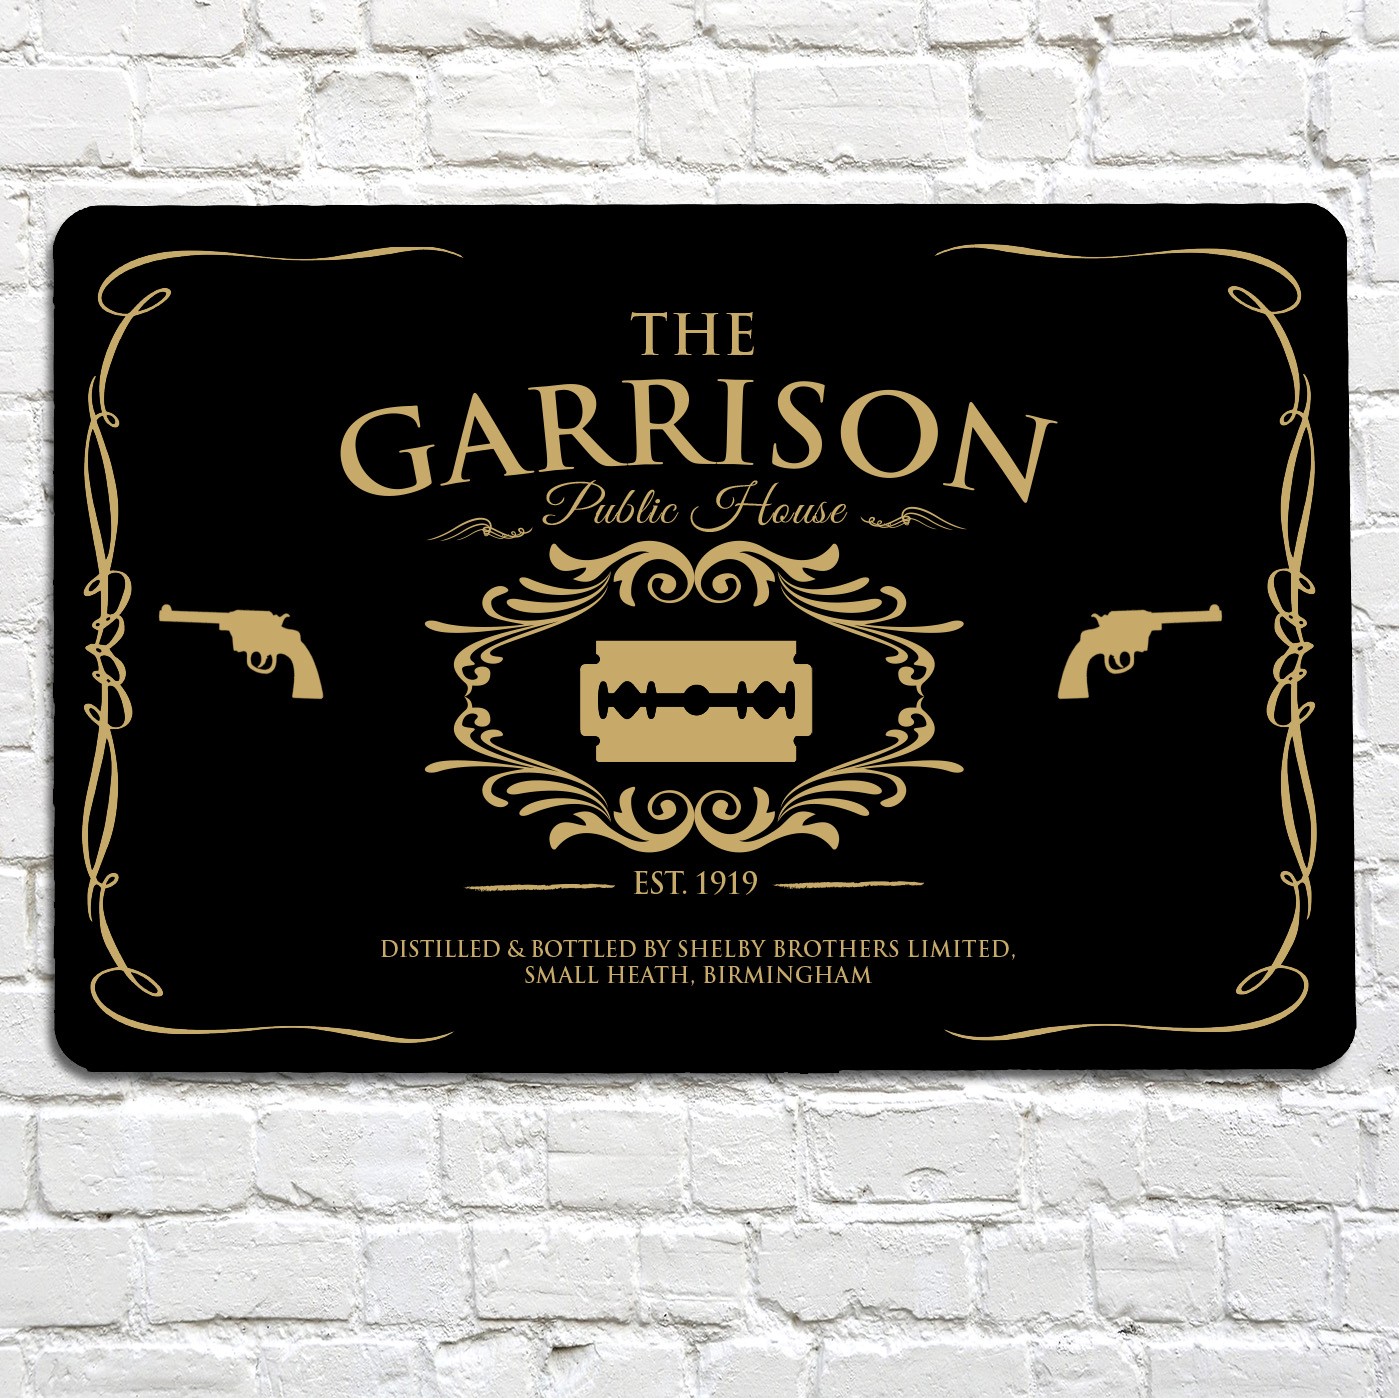 the-garrison-public-house-sign-peaky-blinders